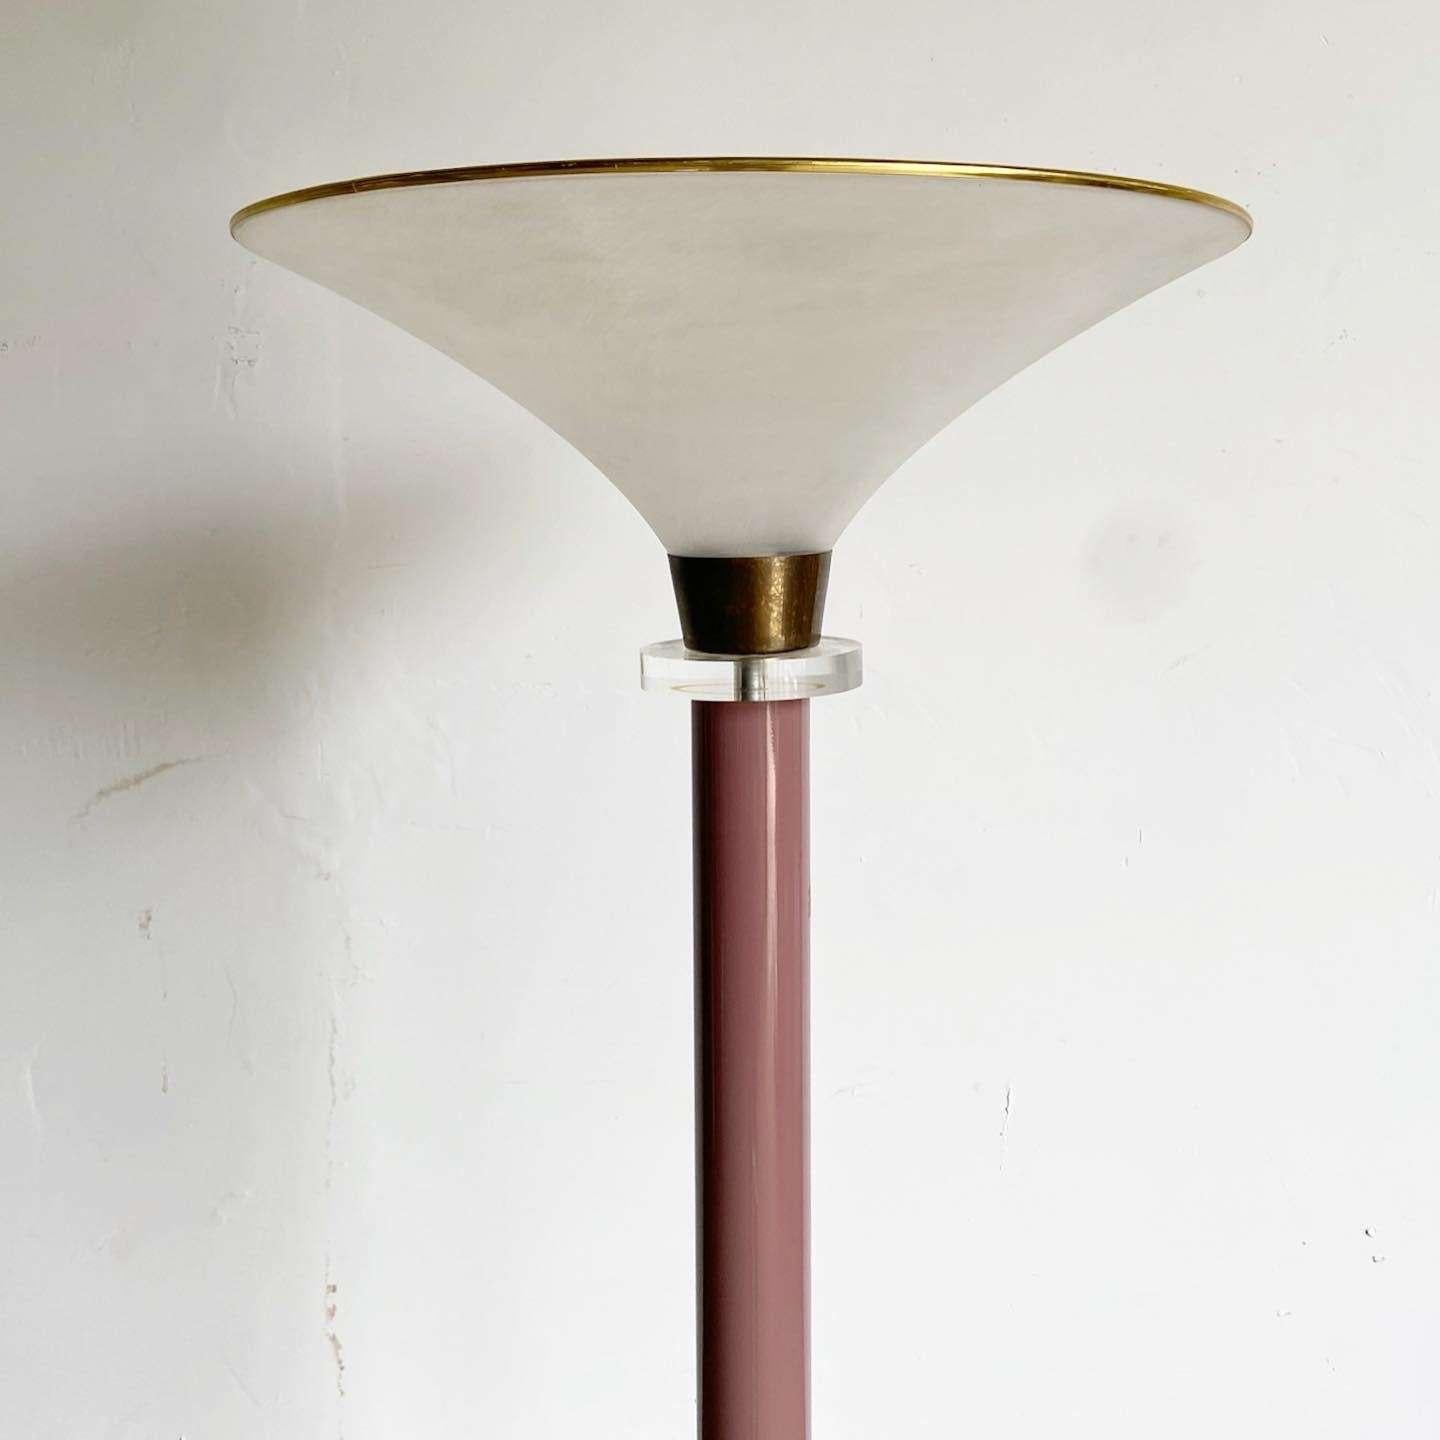 Exceptional vintage postmodern floor lamp. Features a mauve stem with stacked lucite and brass accents.